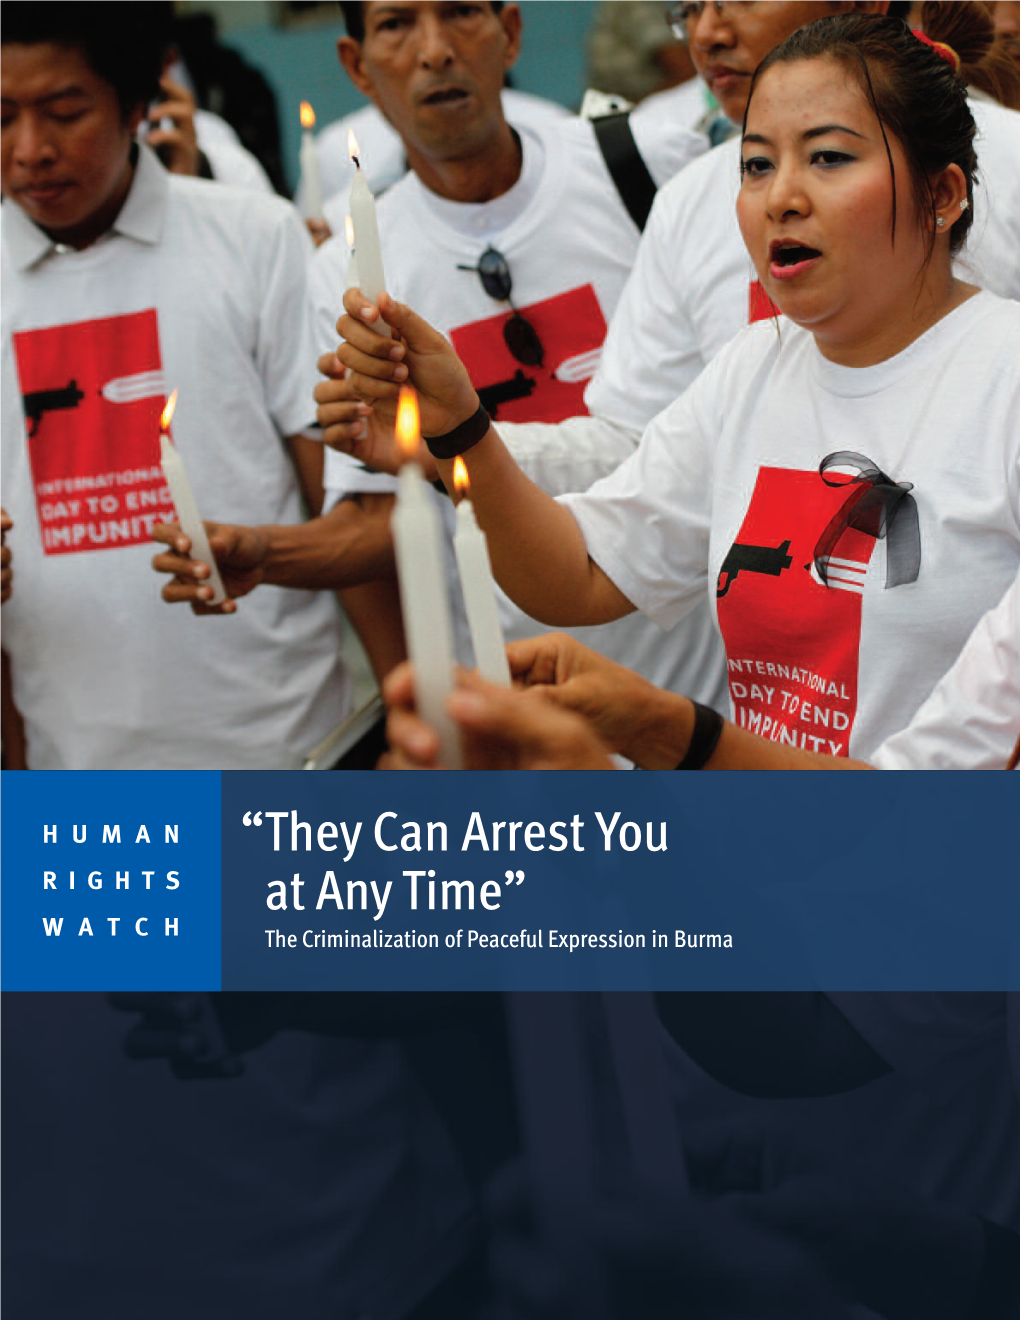 “They Can Arrest You at Any Time” the Criminalization of Peaceful Expression in Burma